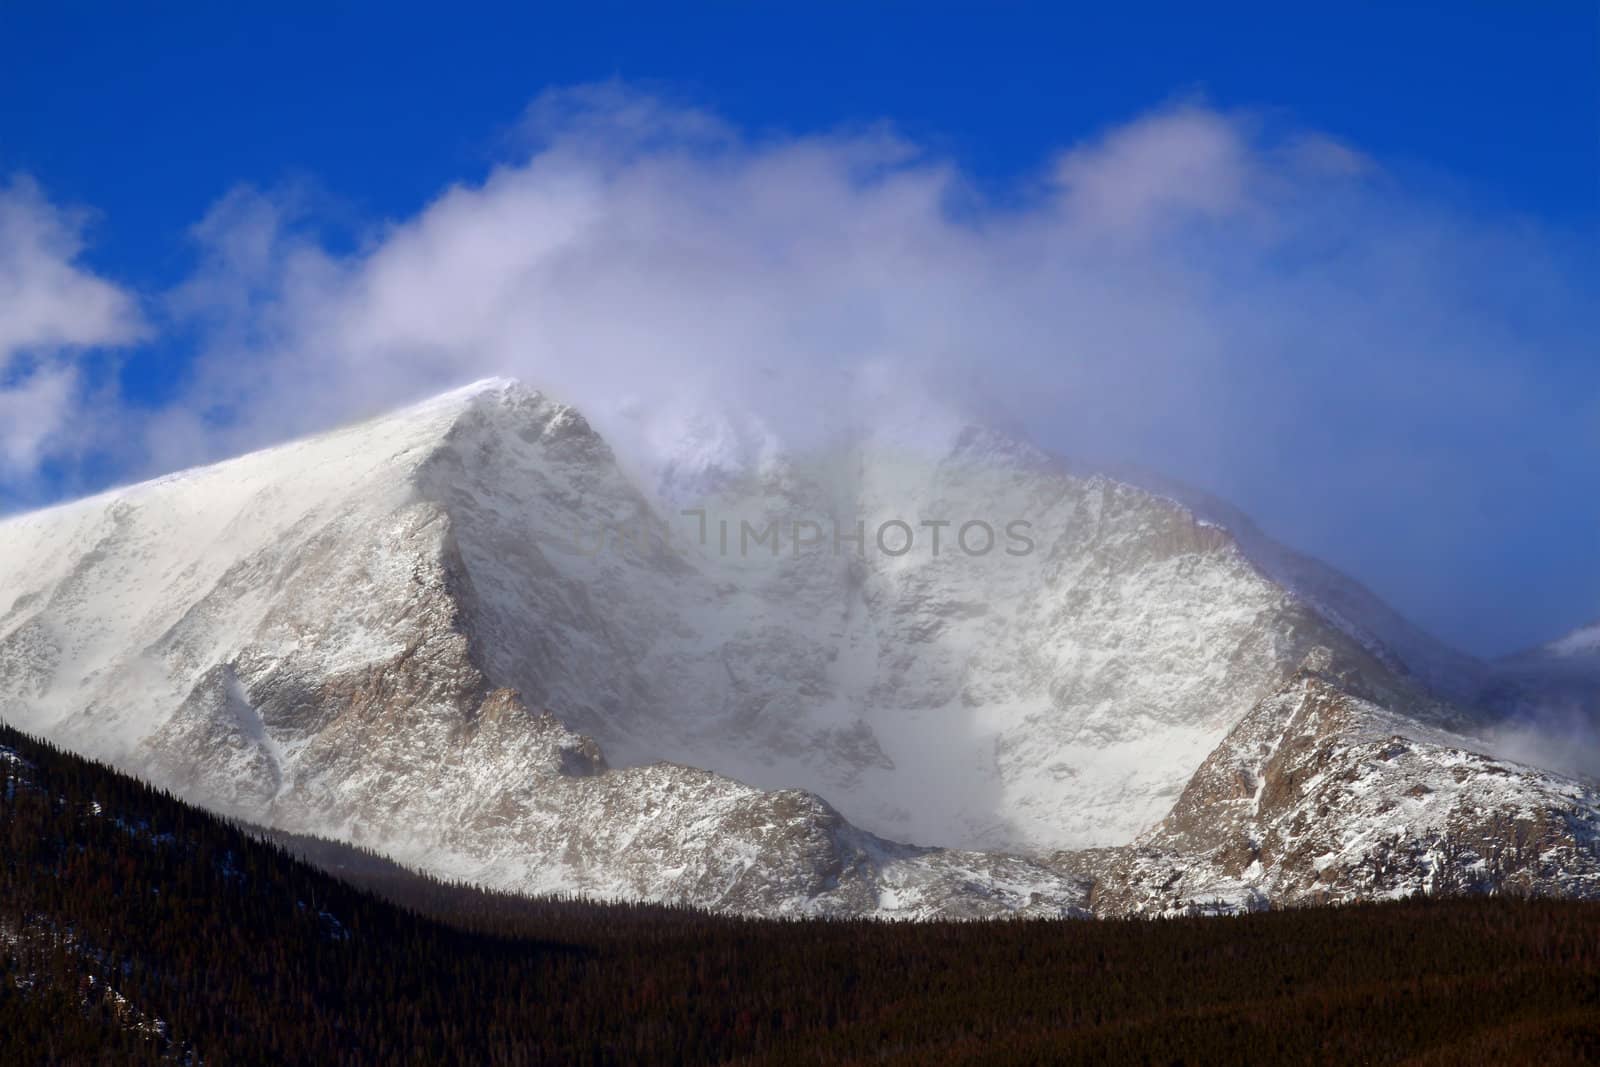 Intense winds create a fog of snow over Mount Ypsilon of Rocky Mountain National Park in Colorado.